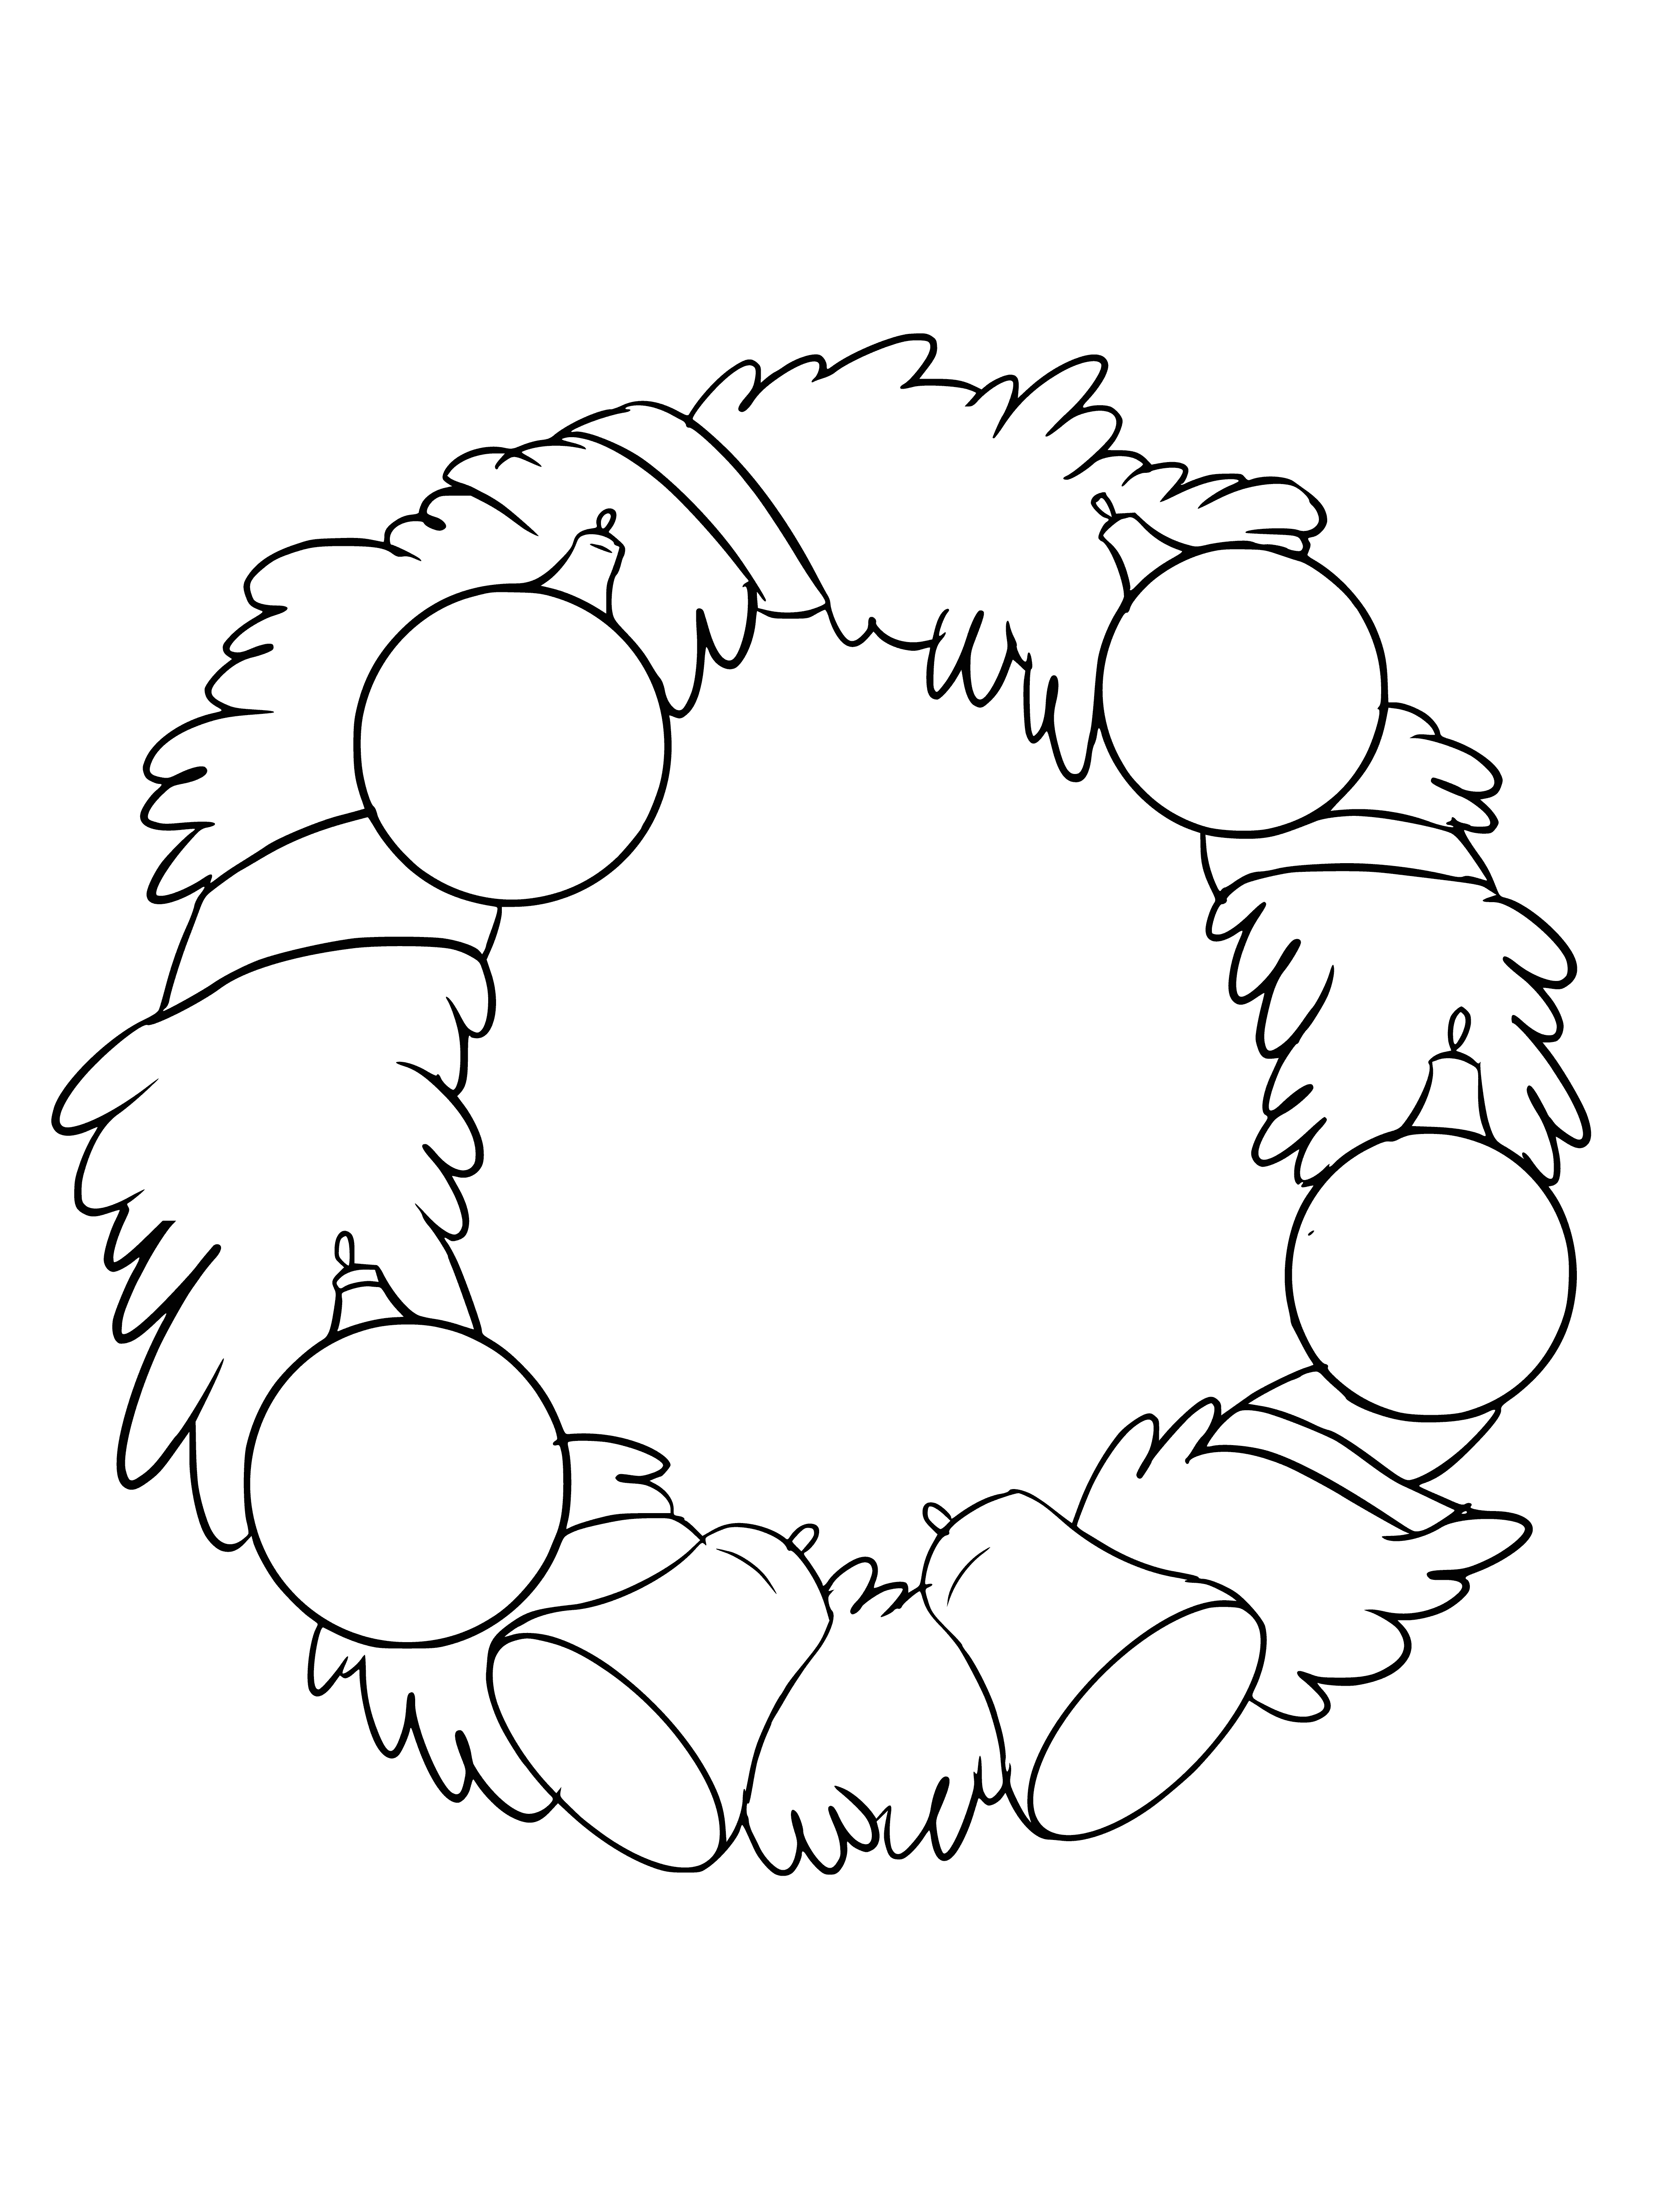 coloring page: Round wreath made of greenery, red bows, pinecones, & red berries.